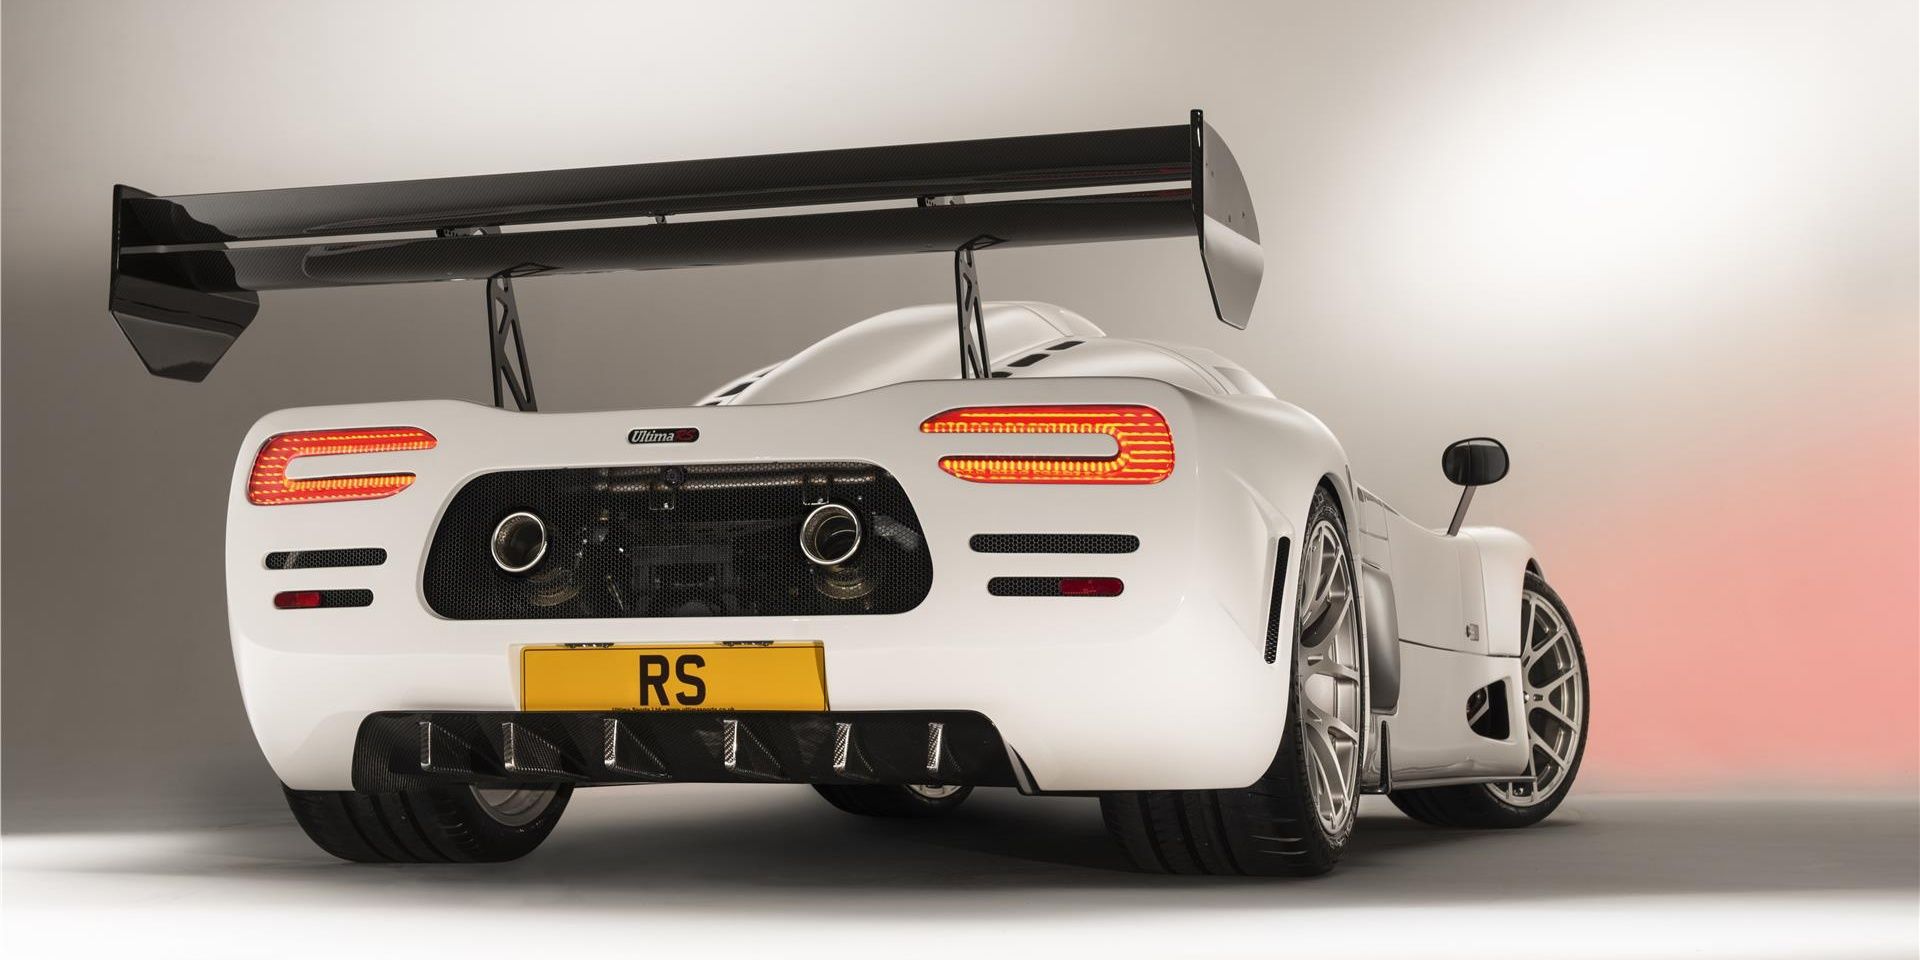 Ultima RS rear 3/4 view